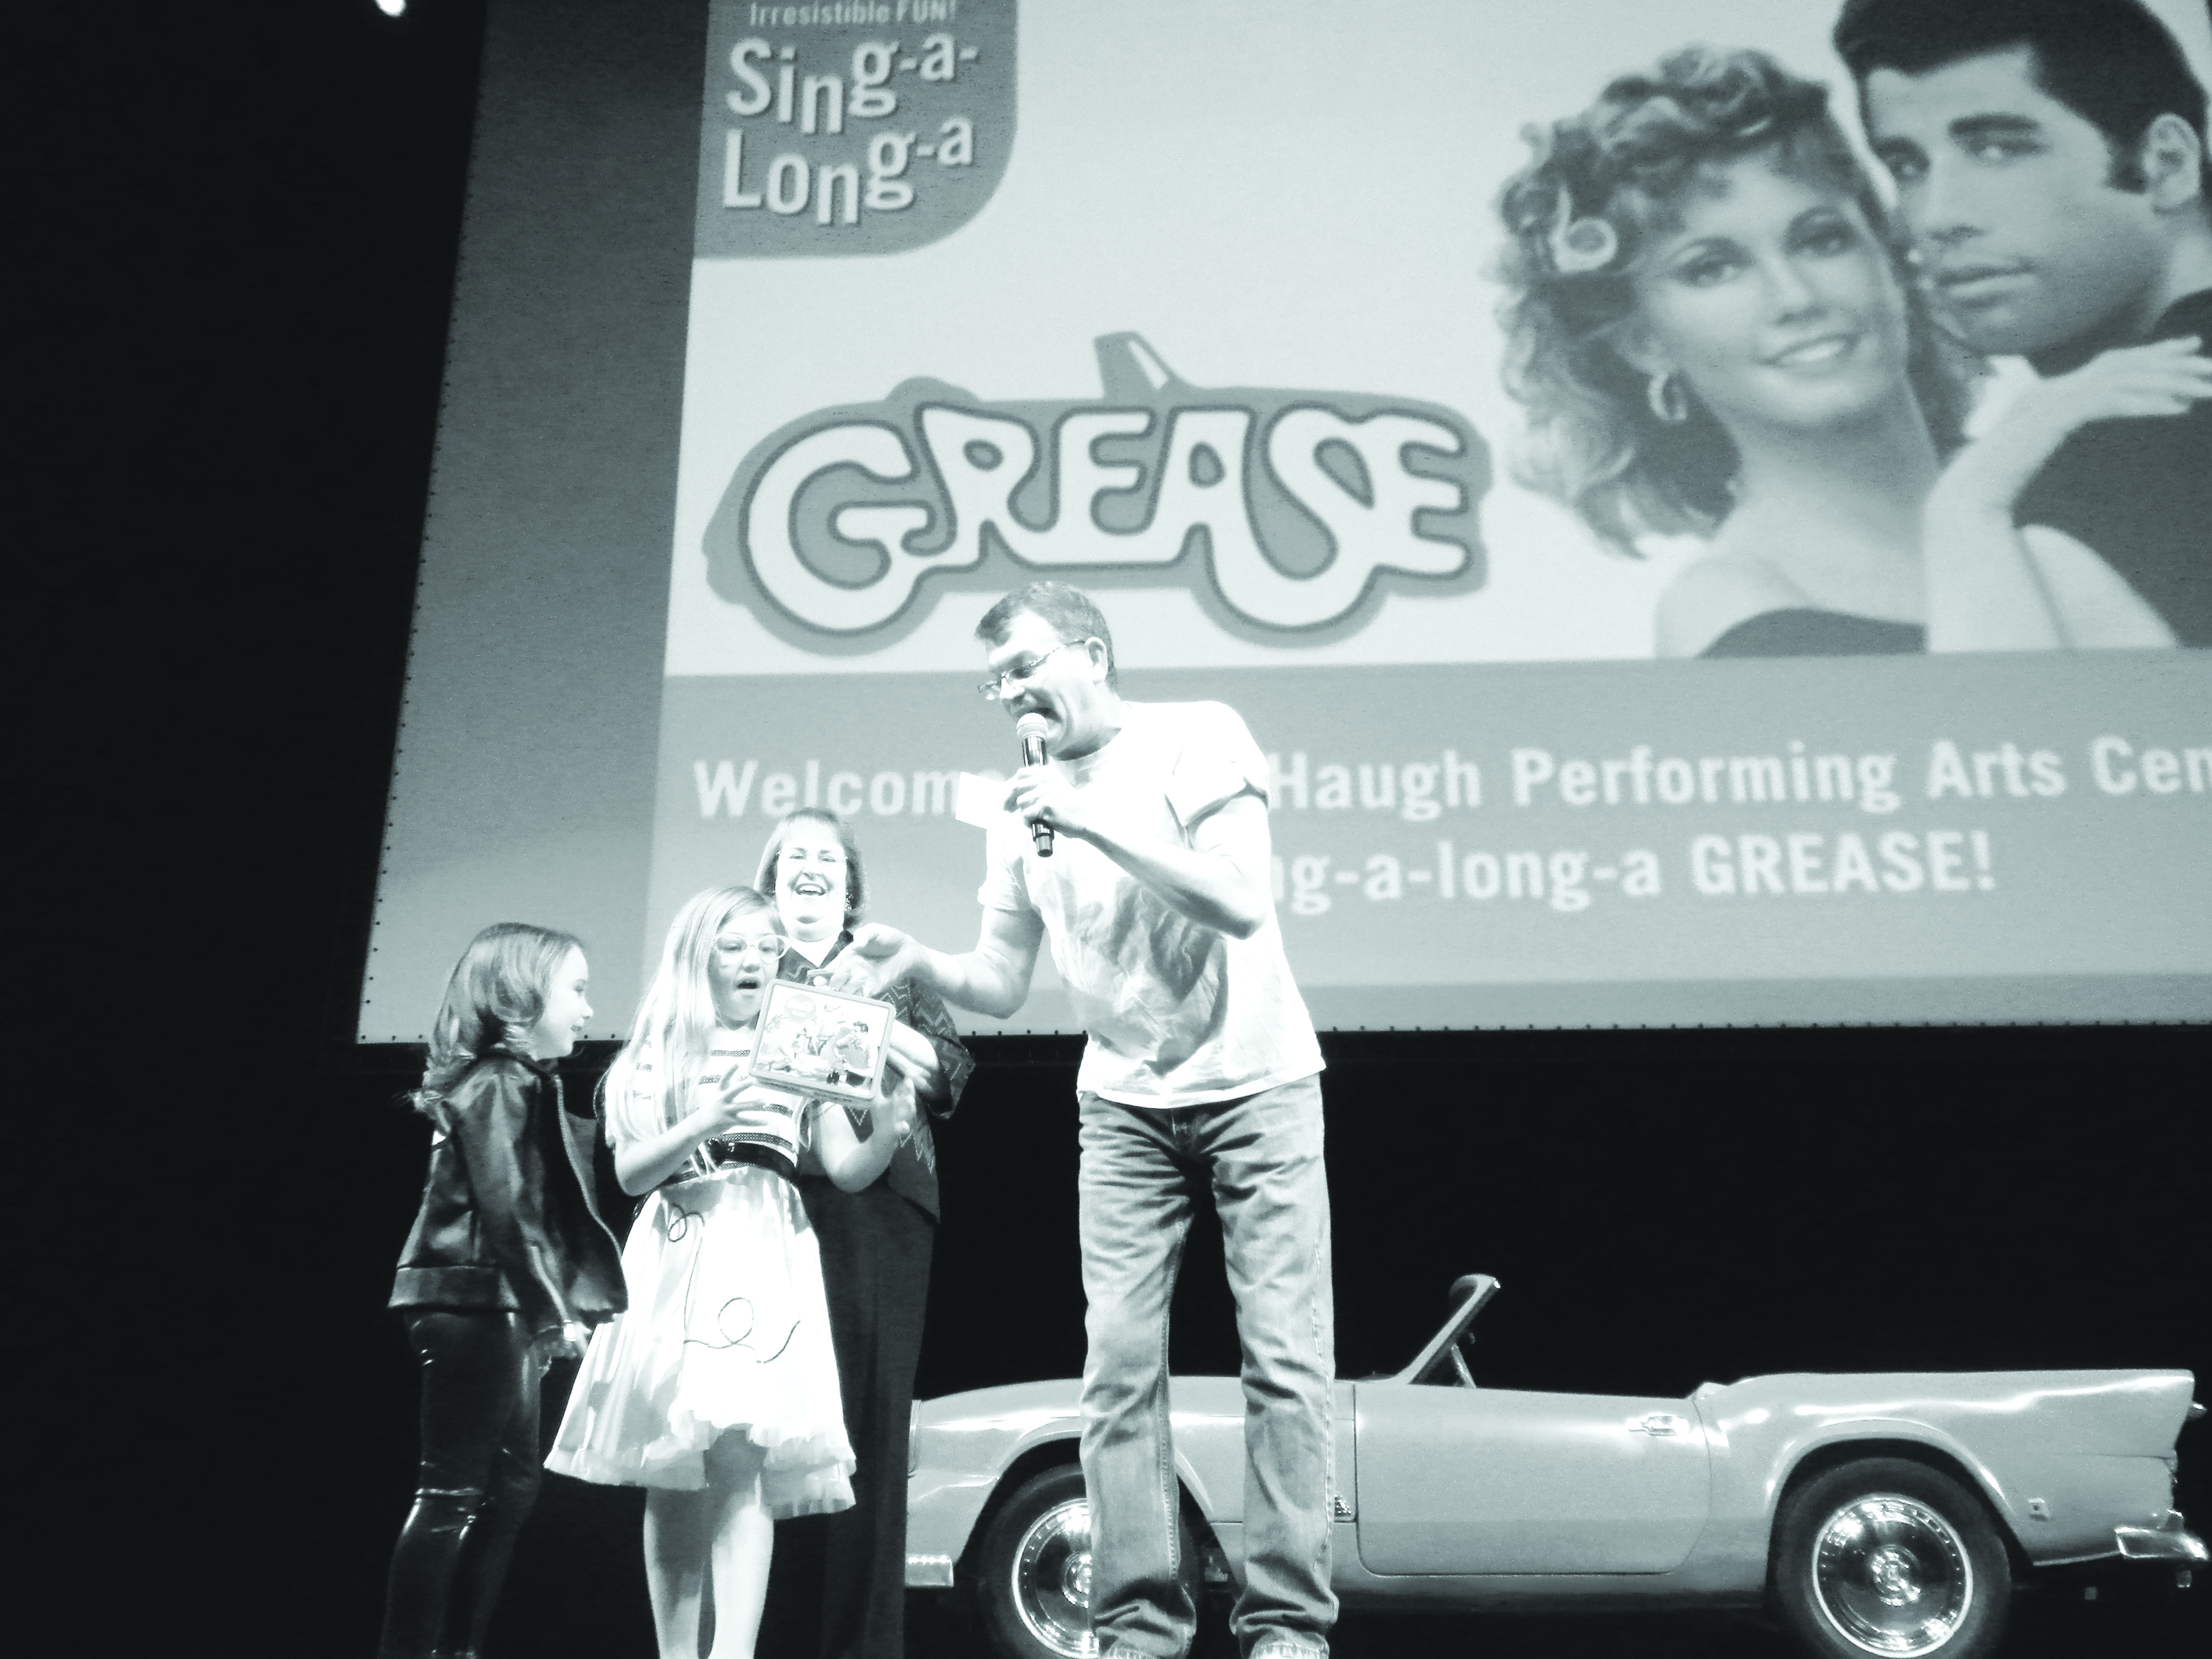 ‘Grease’ Sing-a-Long-a rocks HPAC